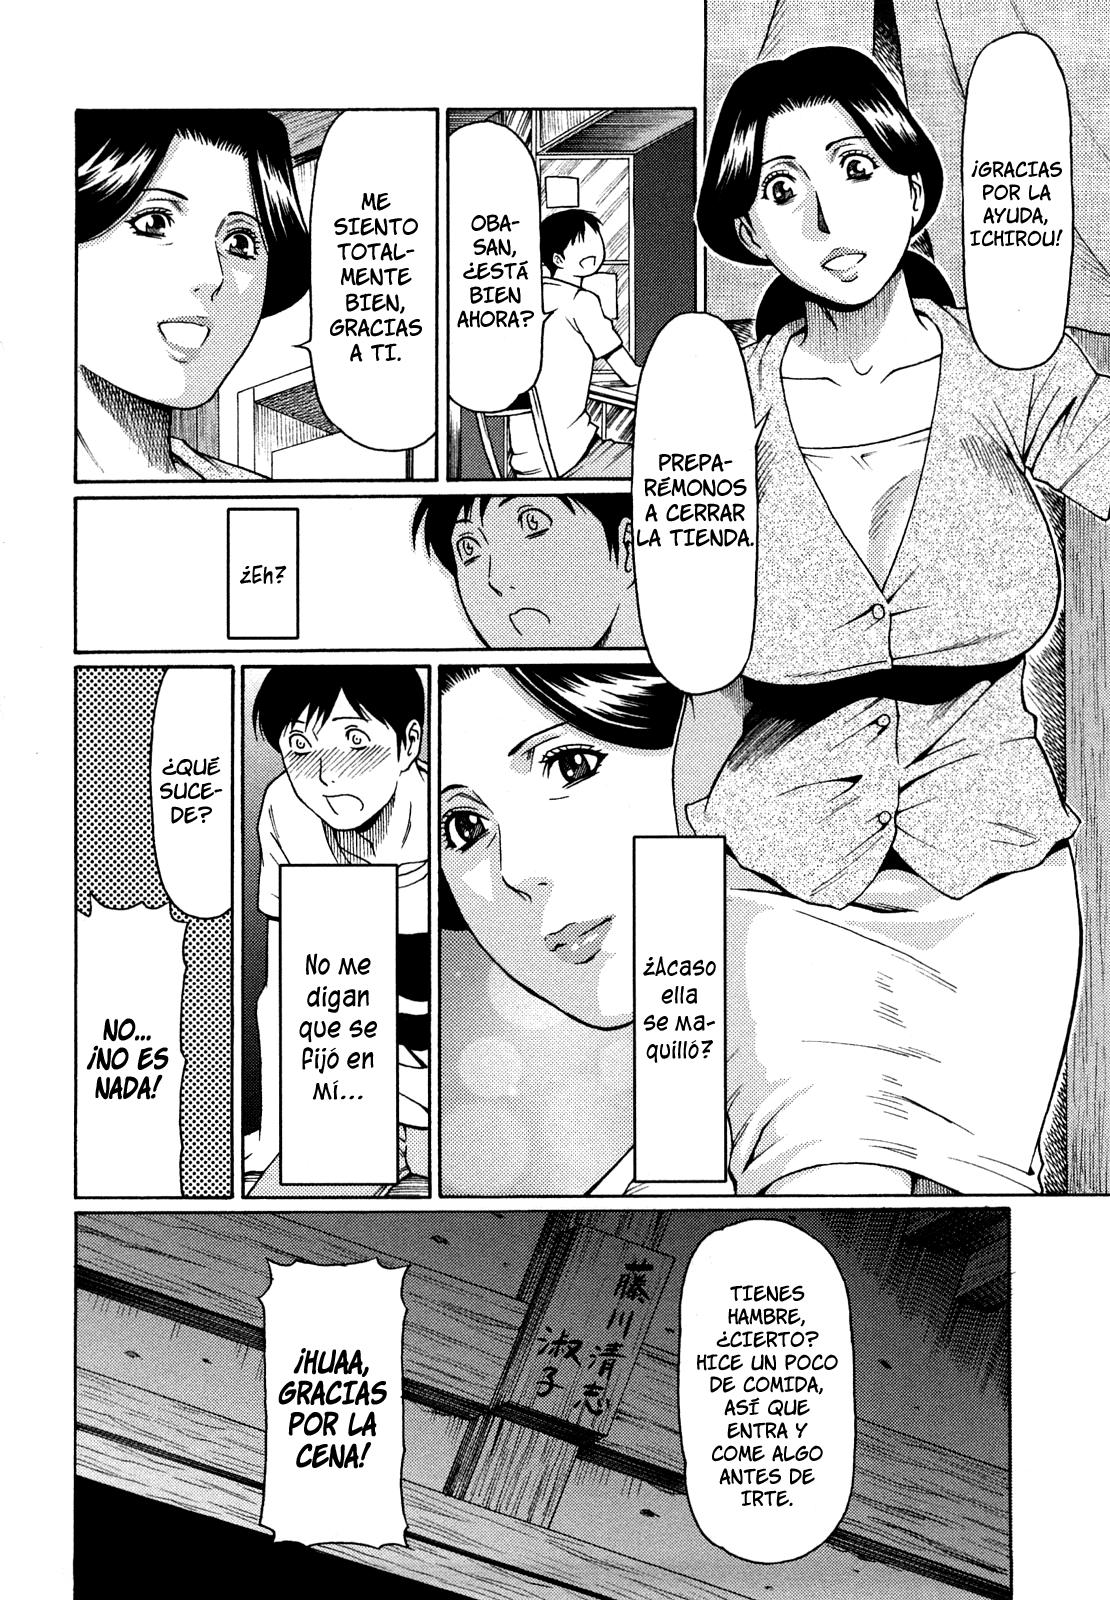 Immorality Love-Hole Completo (Sin Censura) Chapter-8 - 3